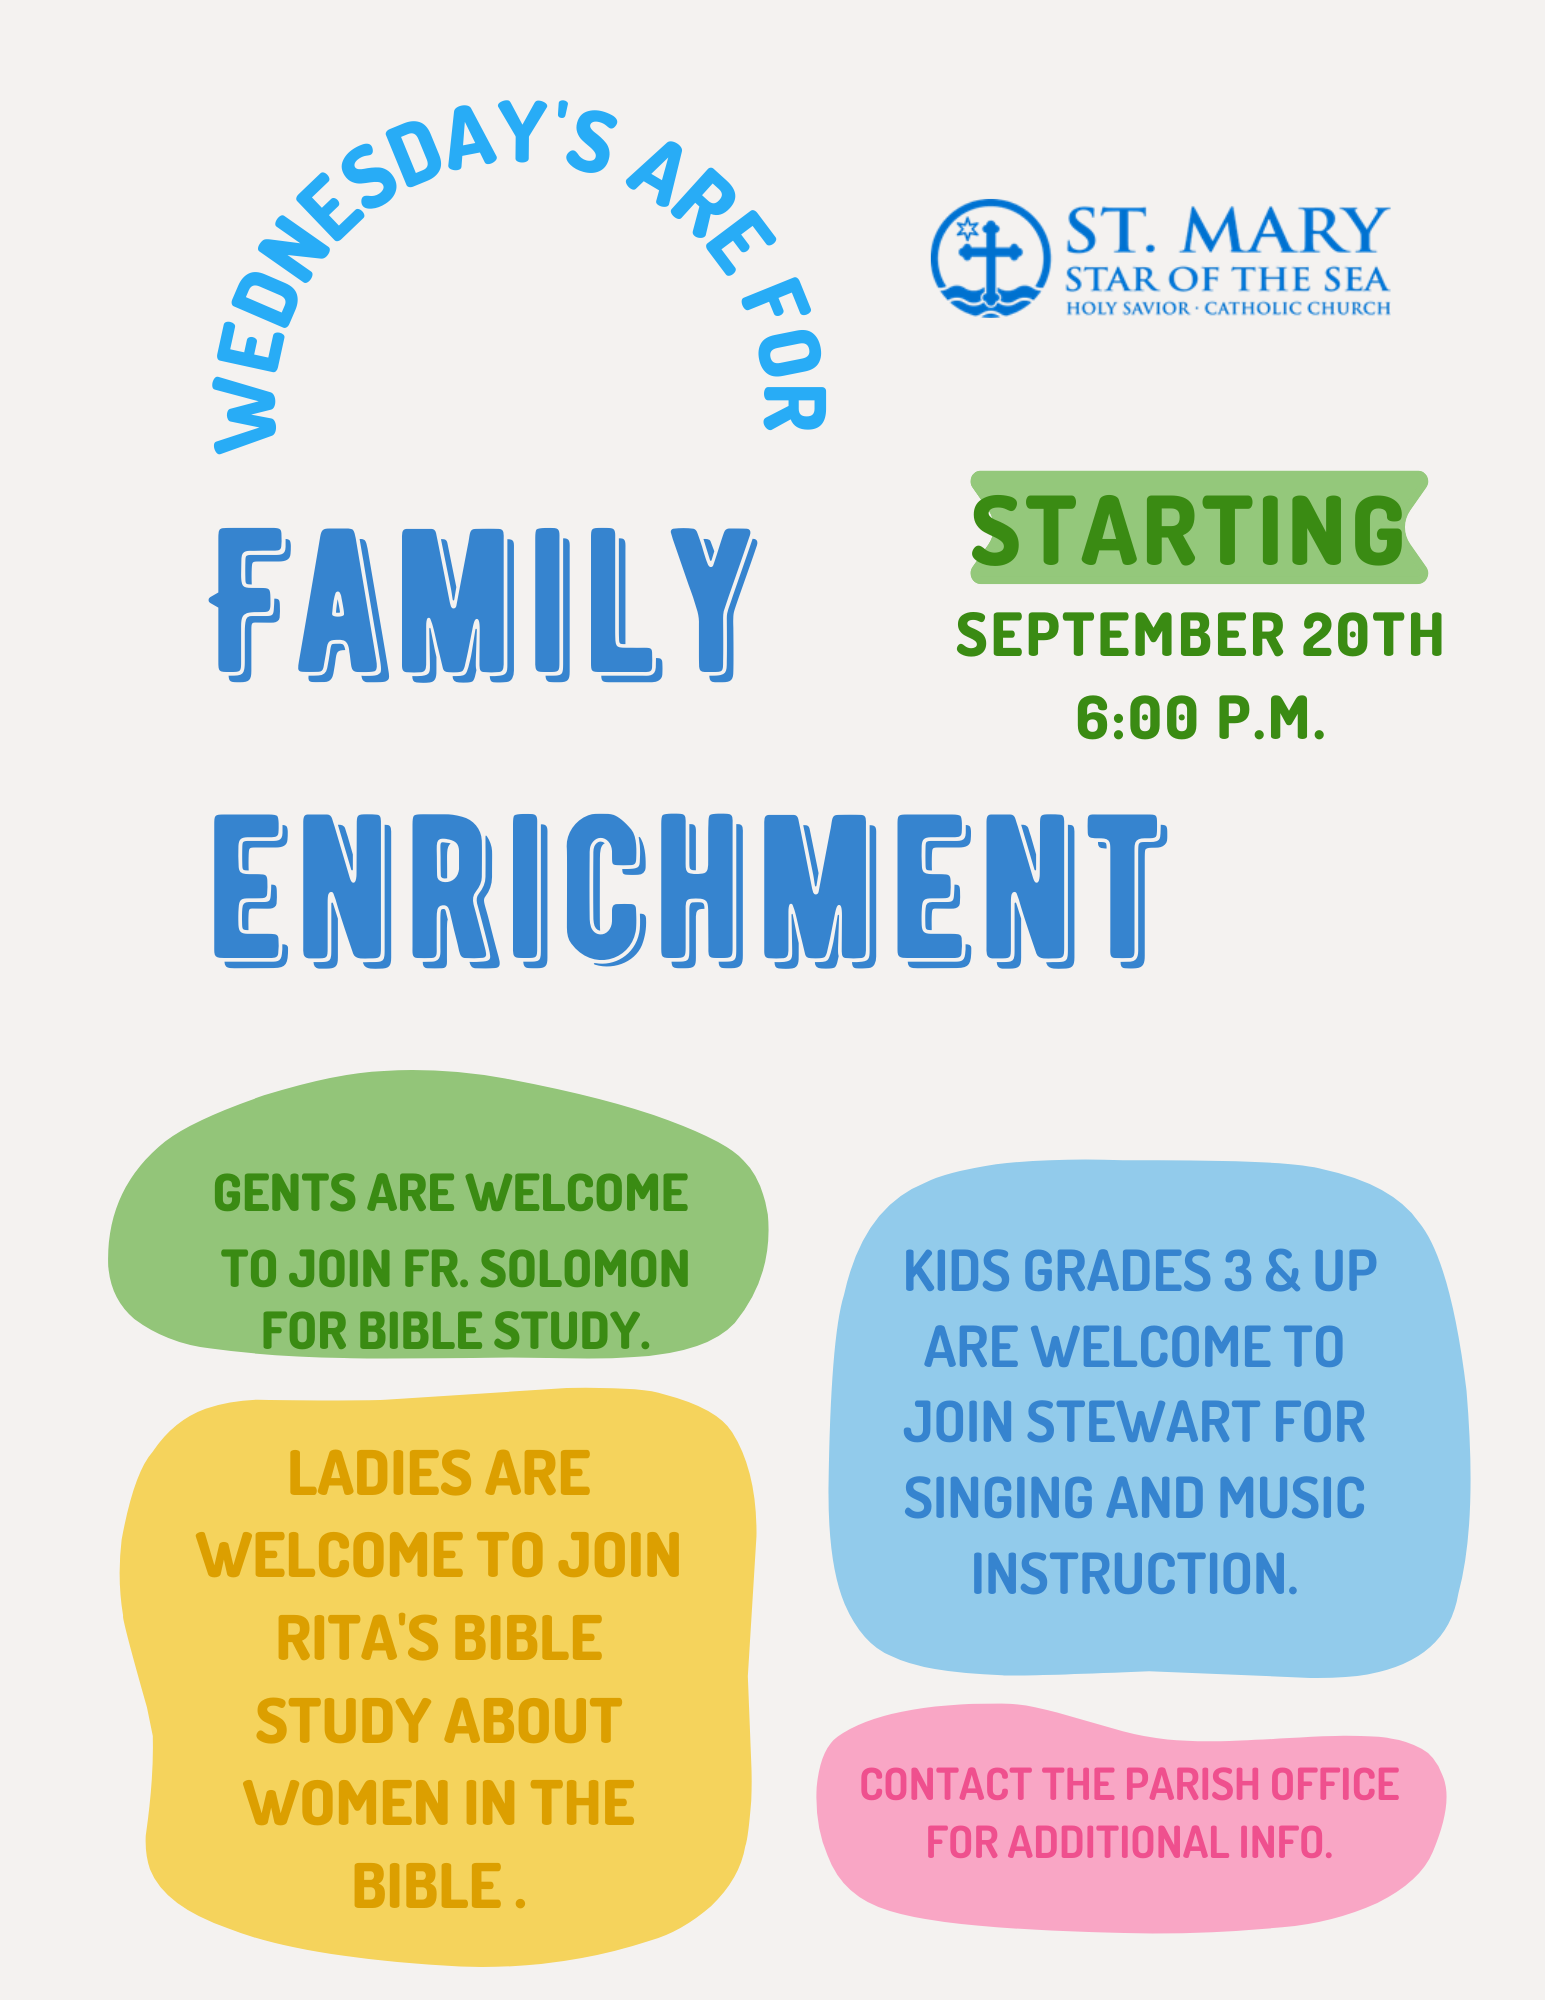 FAMILY ENRICHMENT FLYER 2023 for St. Mary's Star of the Sea Holy Savior Catholic Church